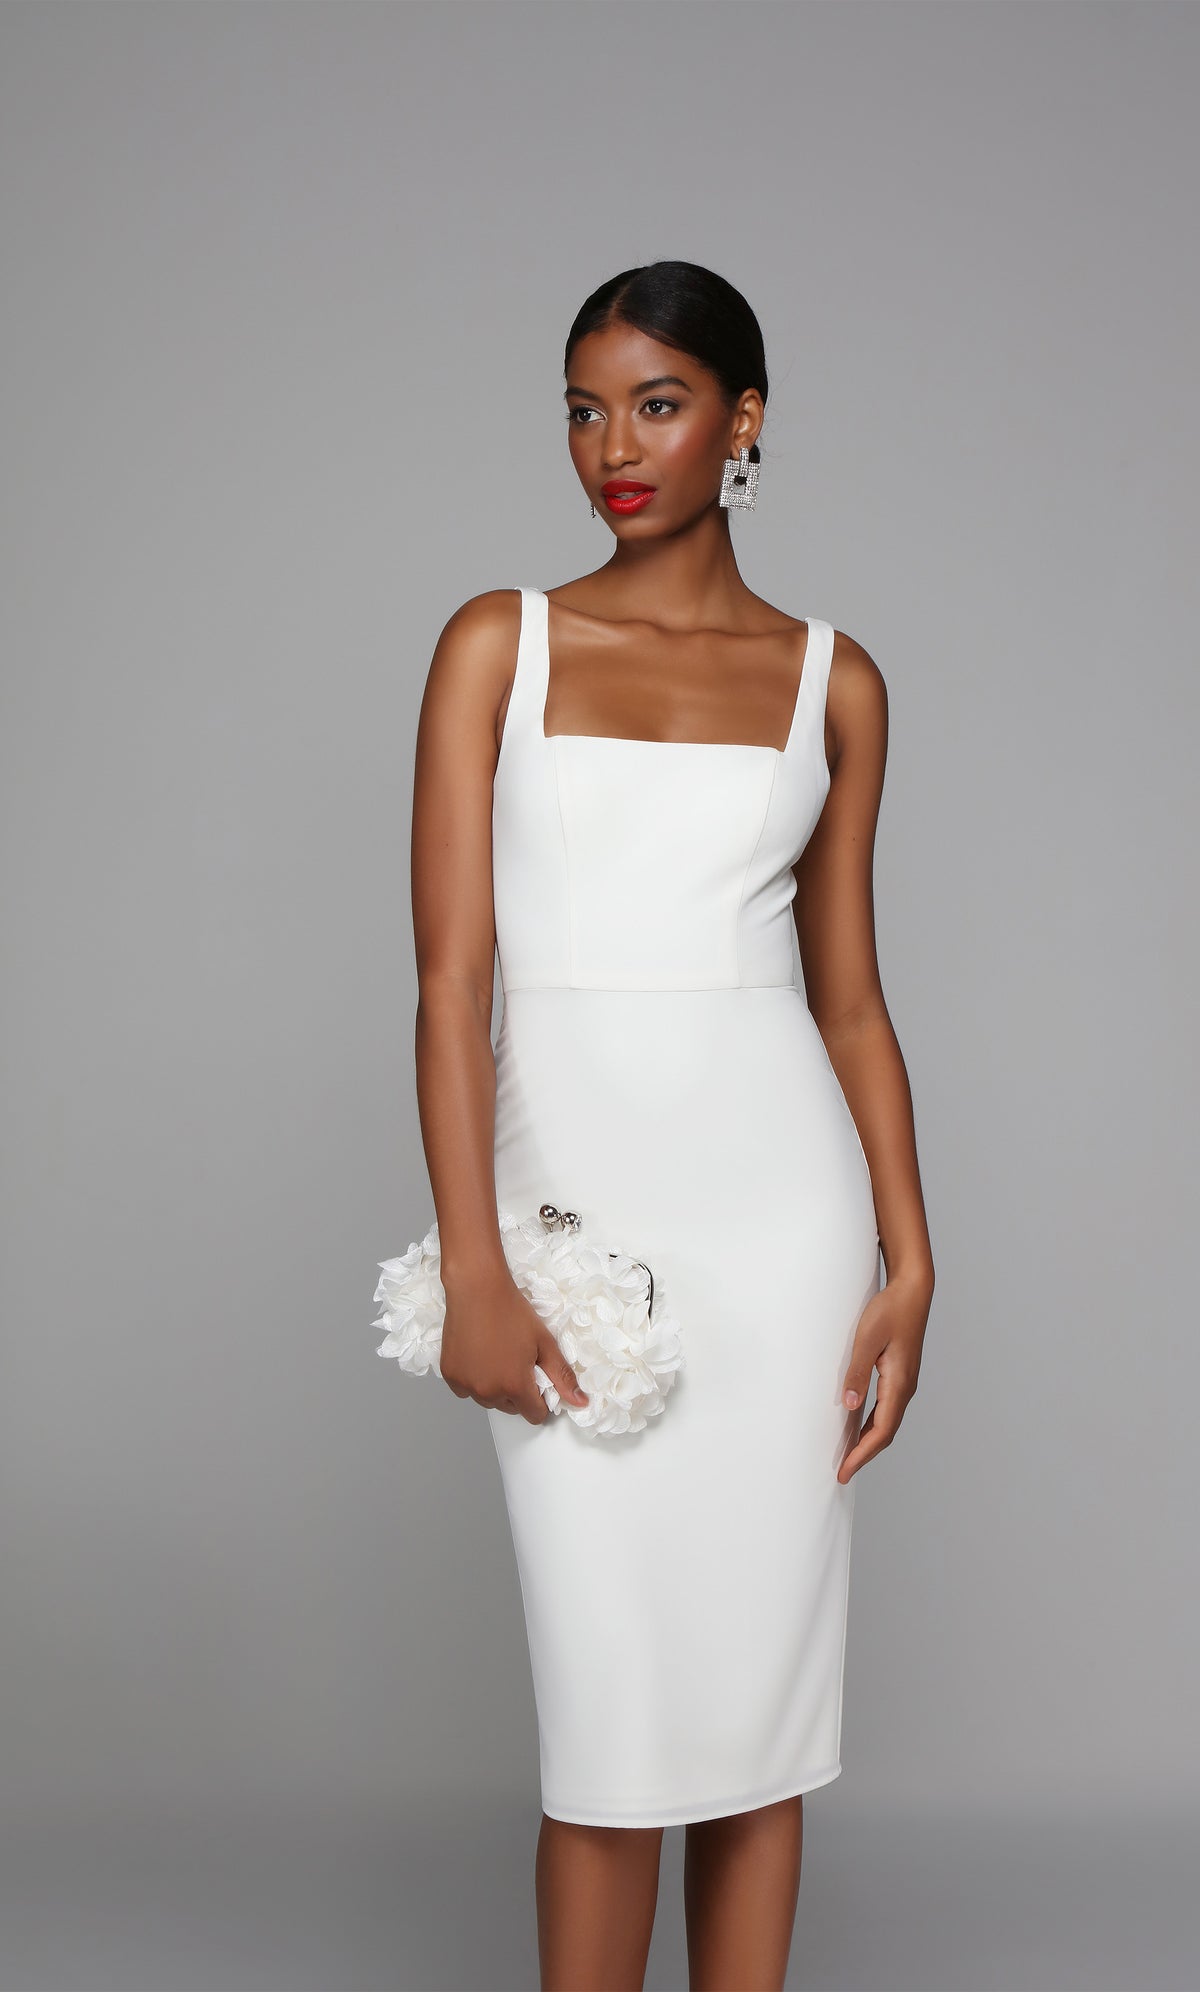 Sleeveless white engagement dress with a square neckline. Color-SWATCH_70010__IVORY